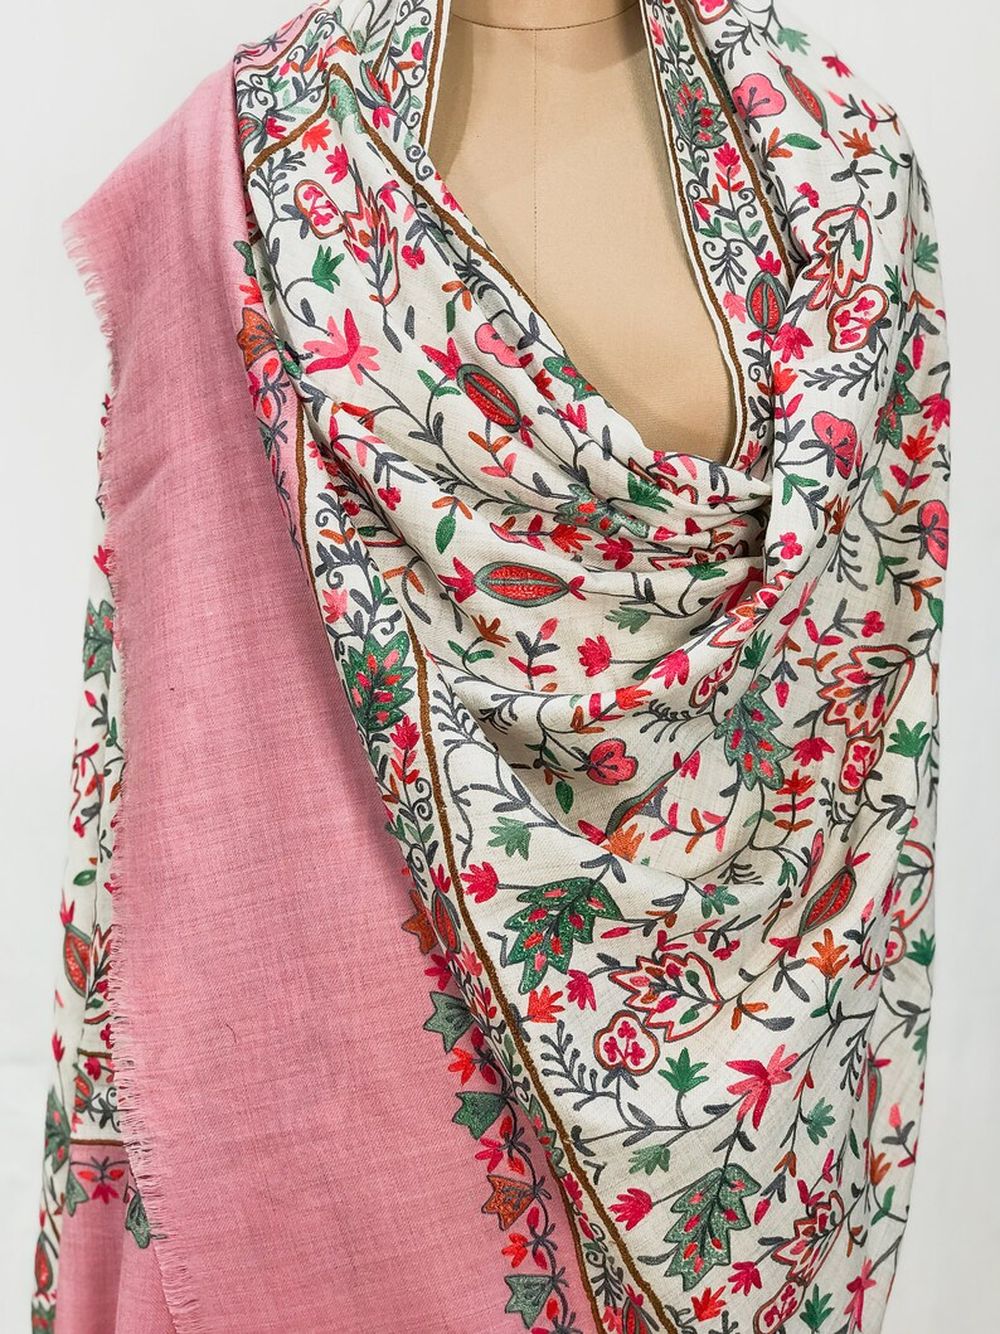 Off-White Pure Wool Shawl with Pink Palla Silk Thread Aari Jaal Embroidery